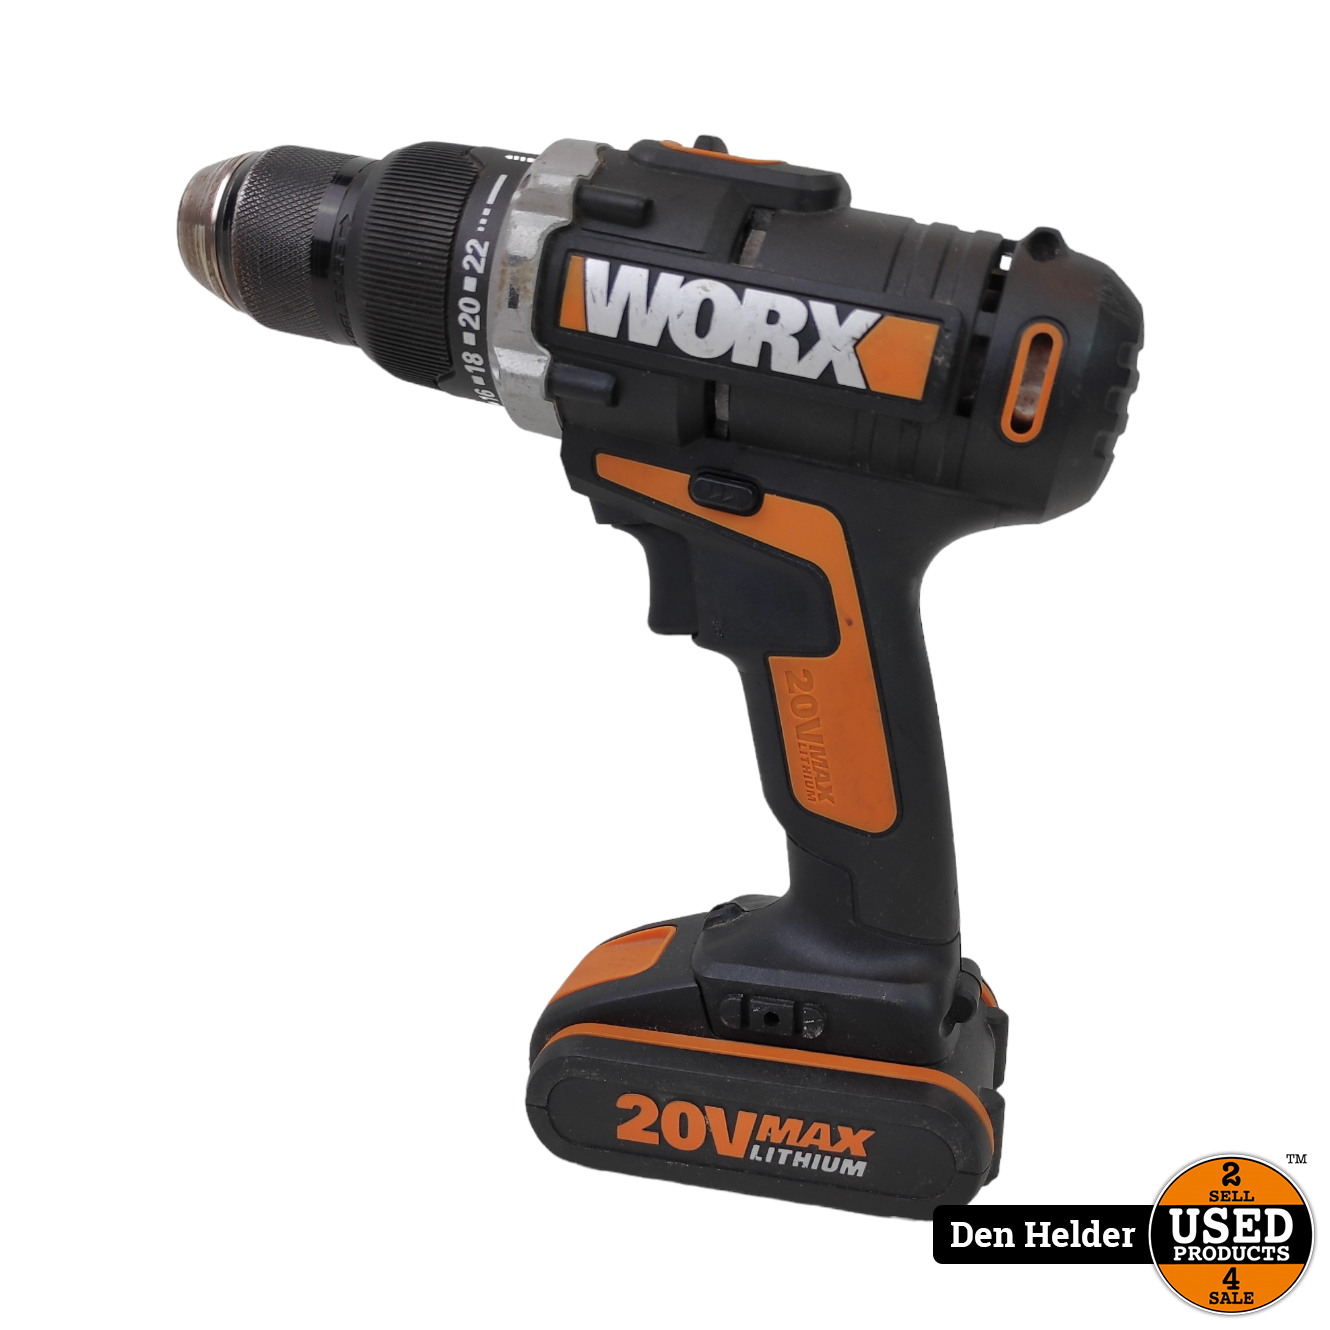 Worx WX372 Klopboormachine 20V - In Nette Staat Used Products Helder